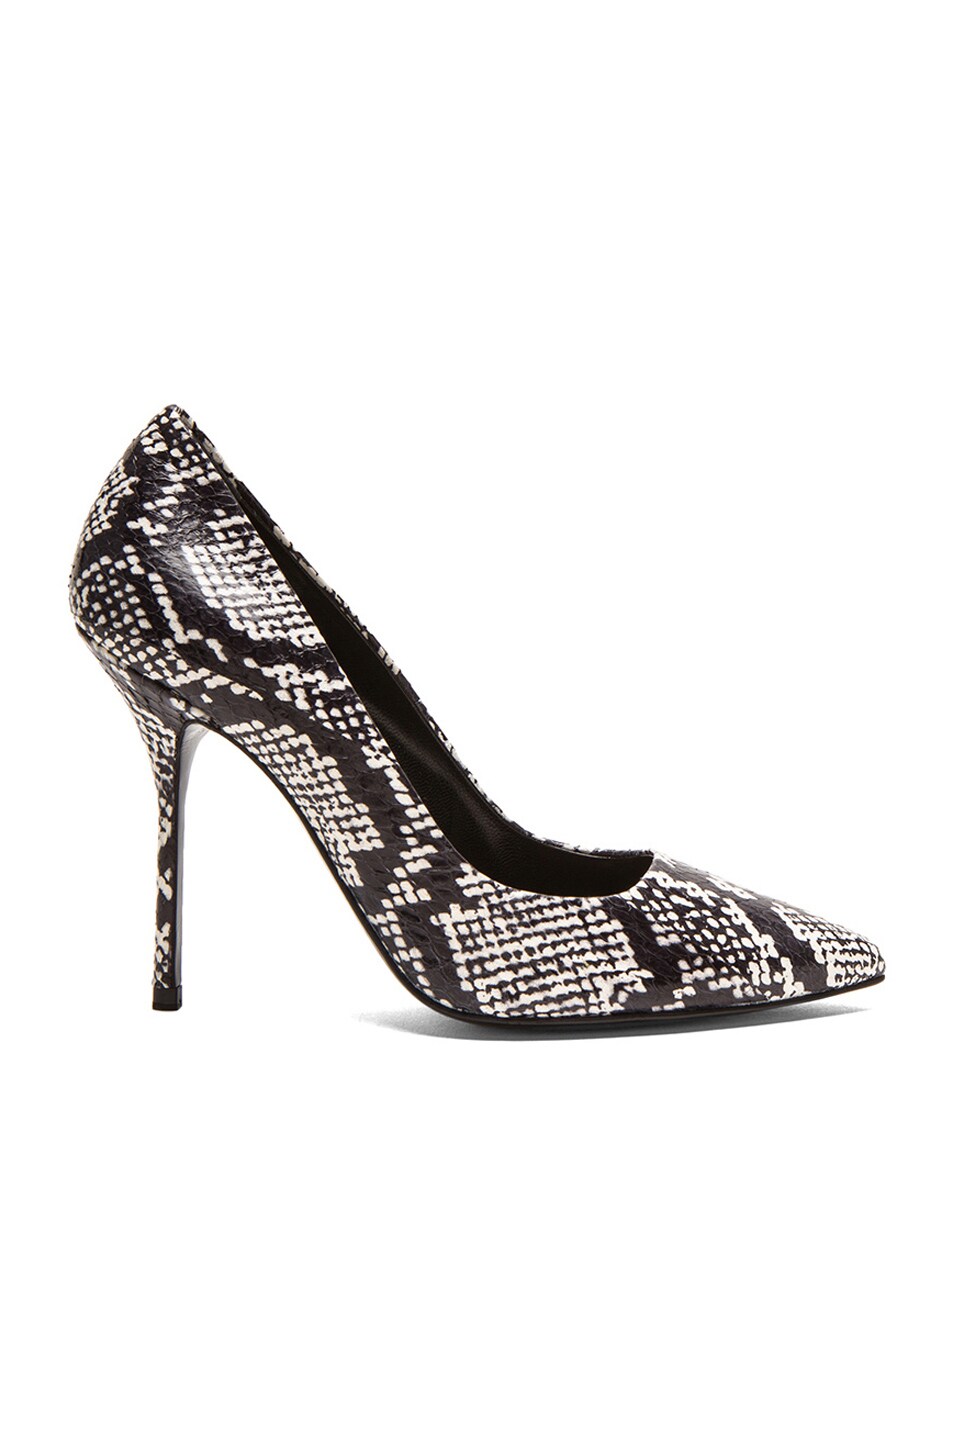 Image 1 of Pierre Hardy Classic Snake Pumps in Black & White